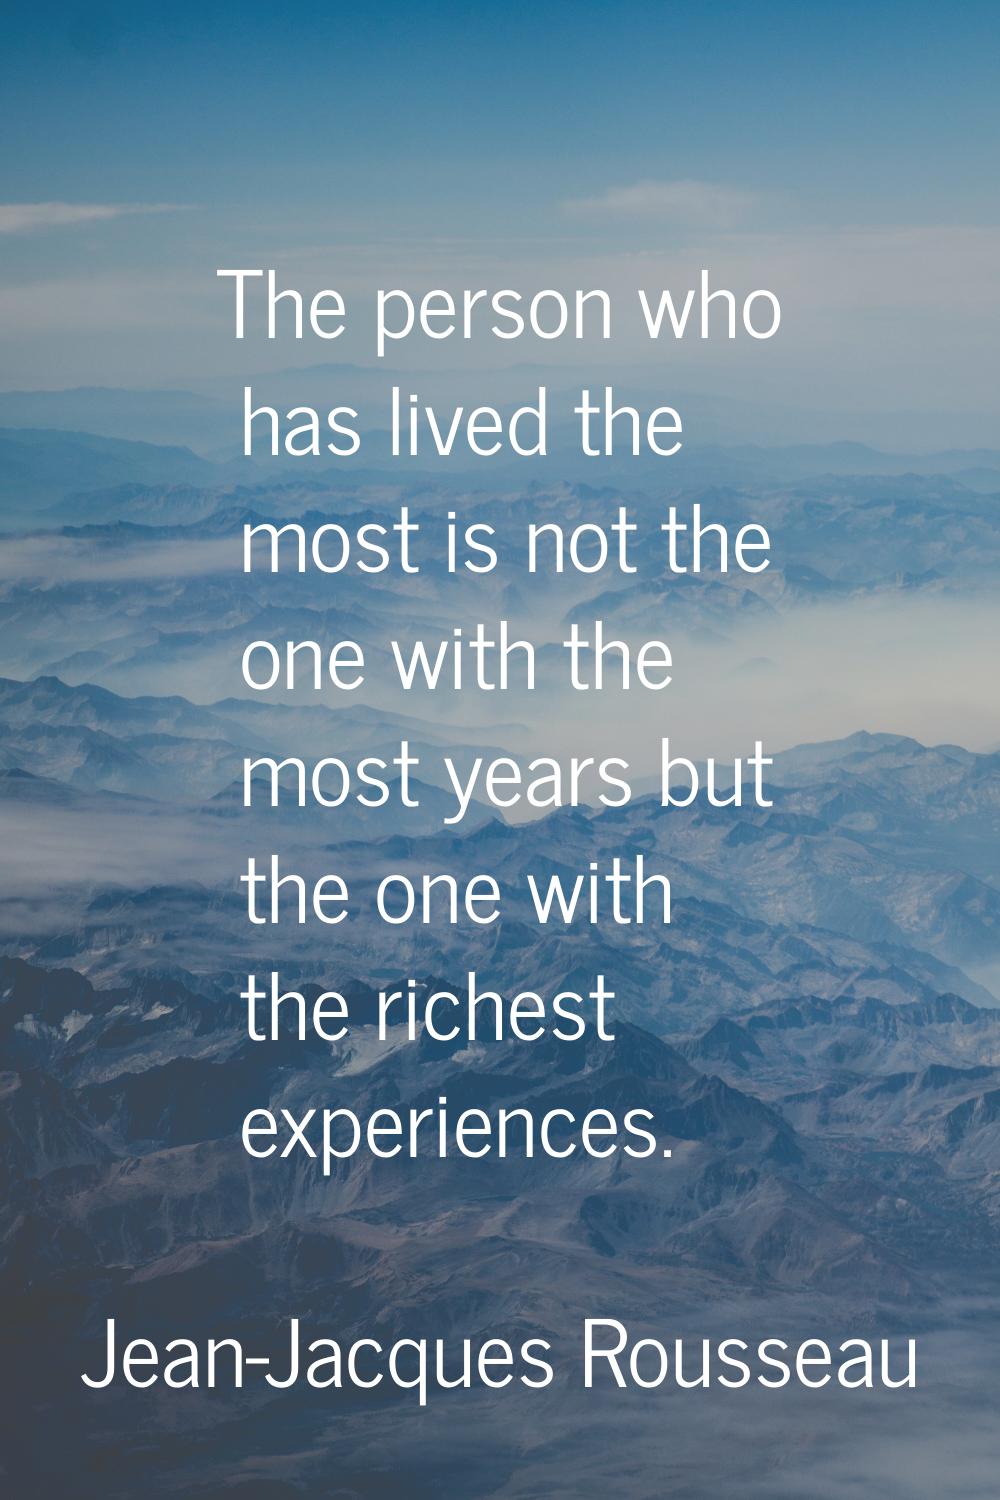 The person who has lived the most is not the one with the most years but the one with the richest e